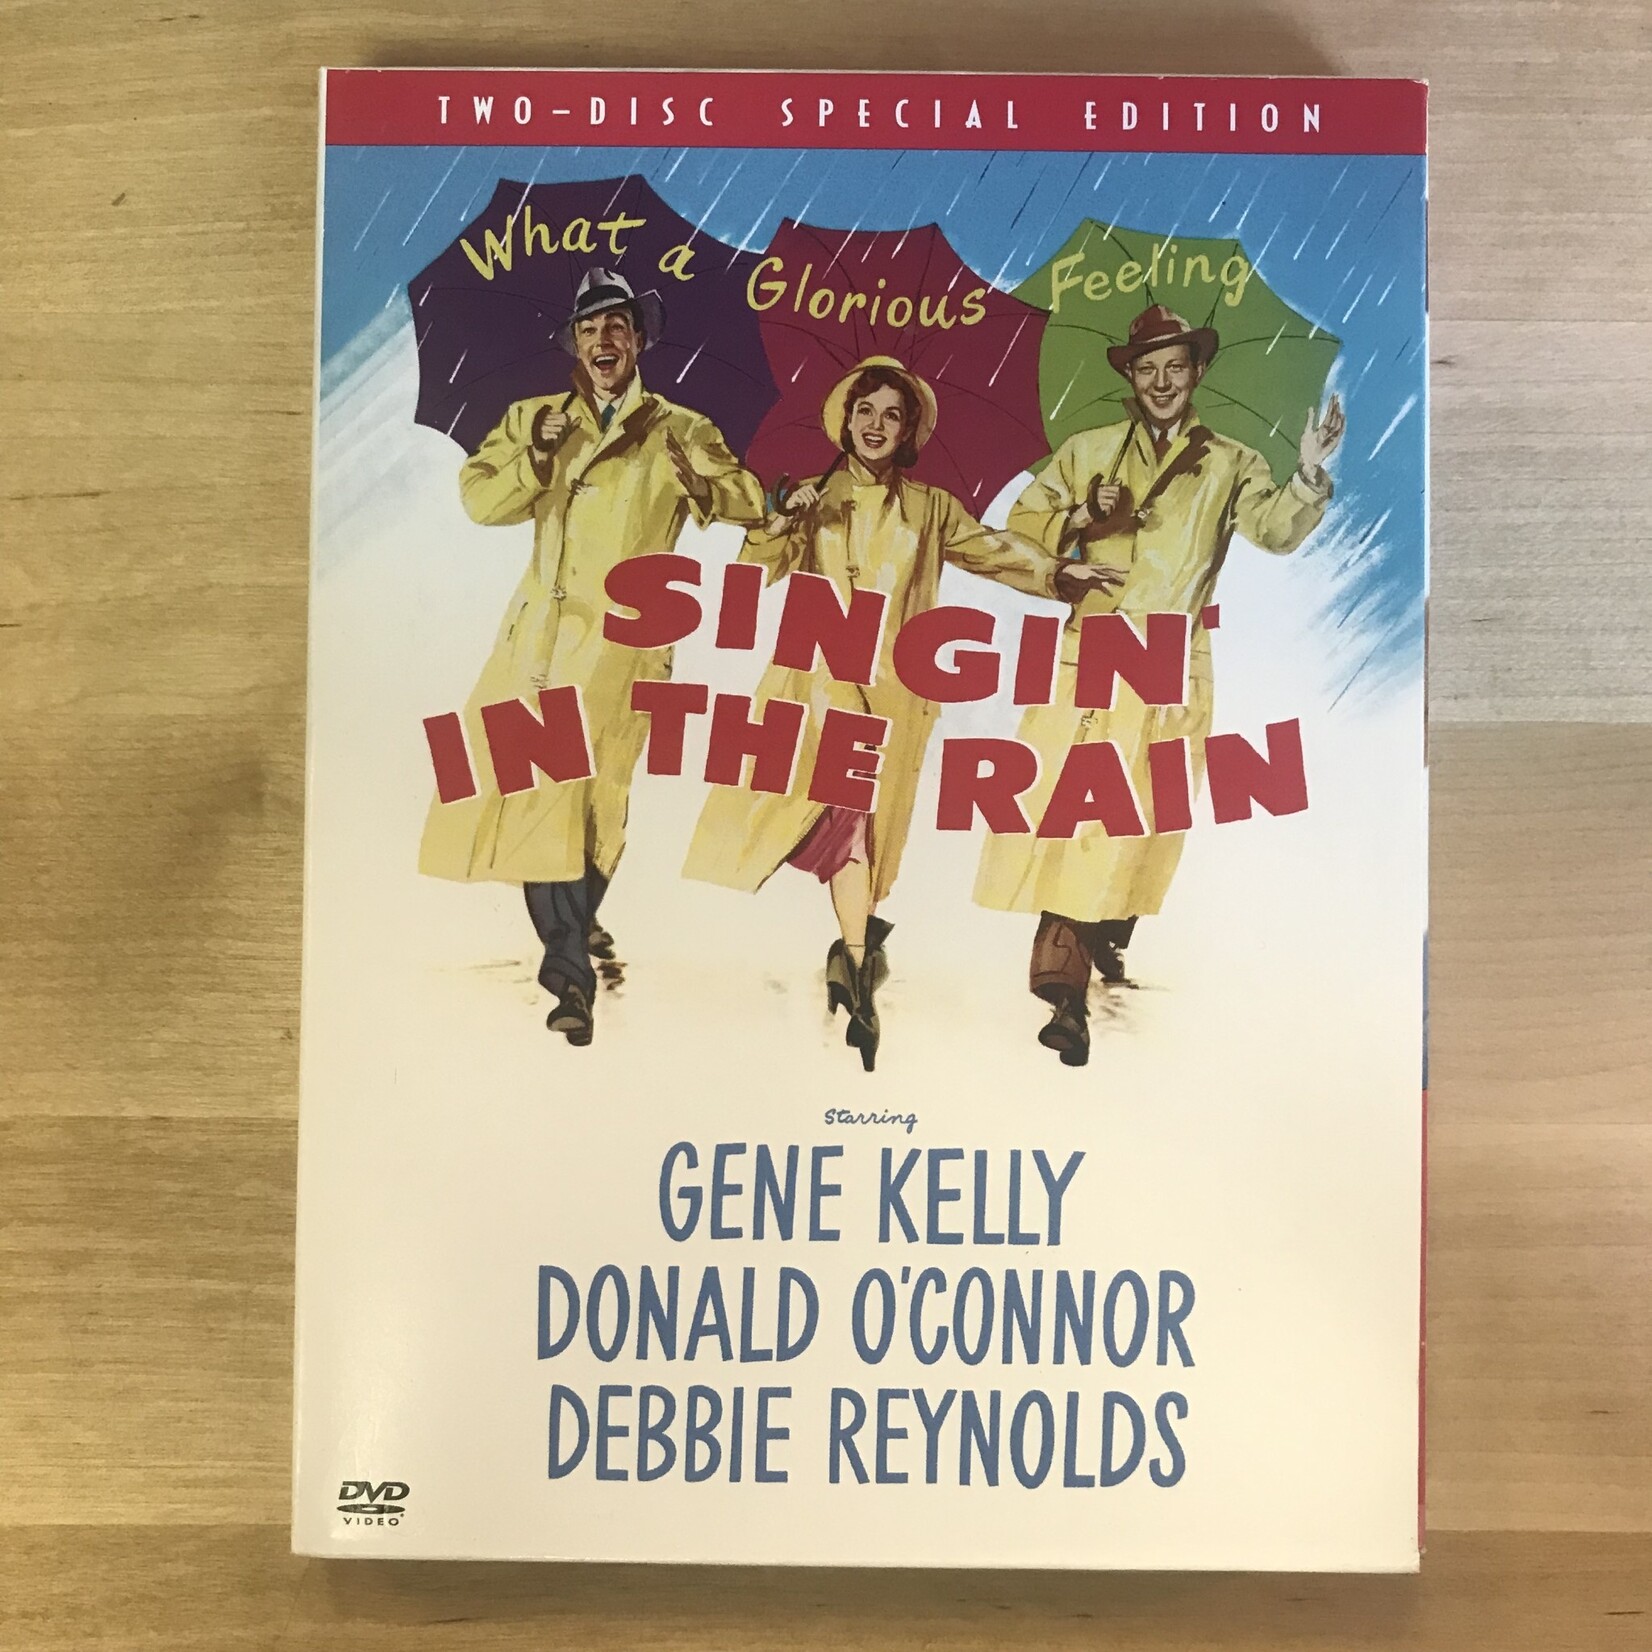 Singin’ In the Rain (Two-Disc Special Edition) - DVD (USED)